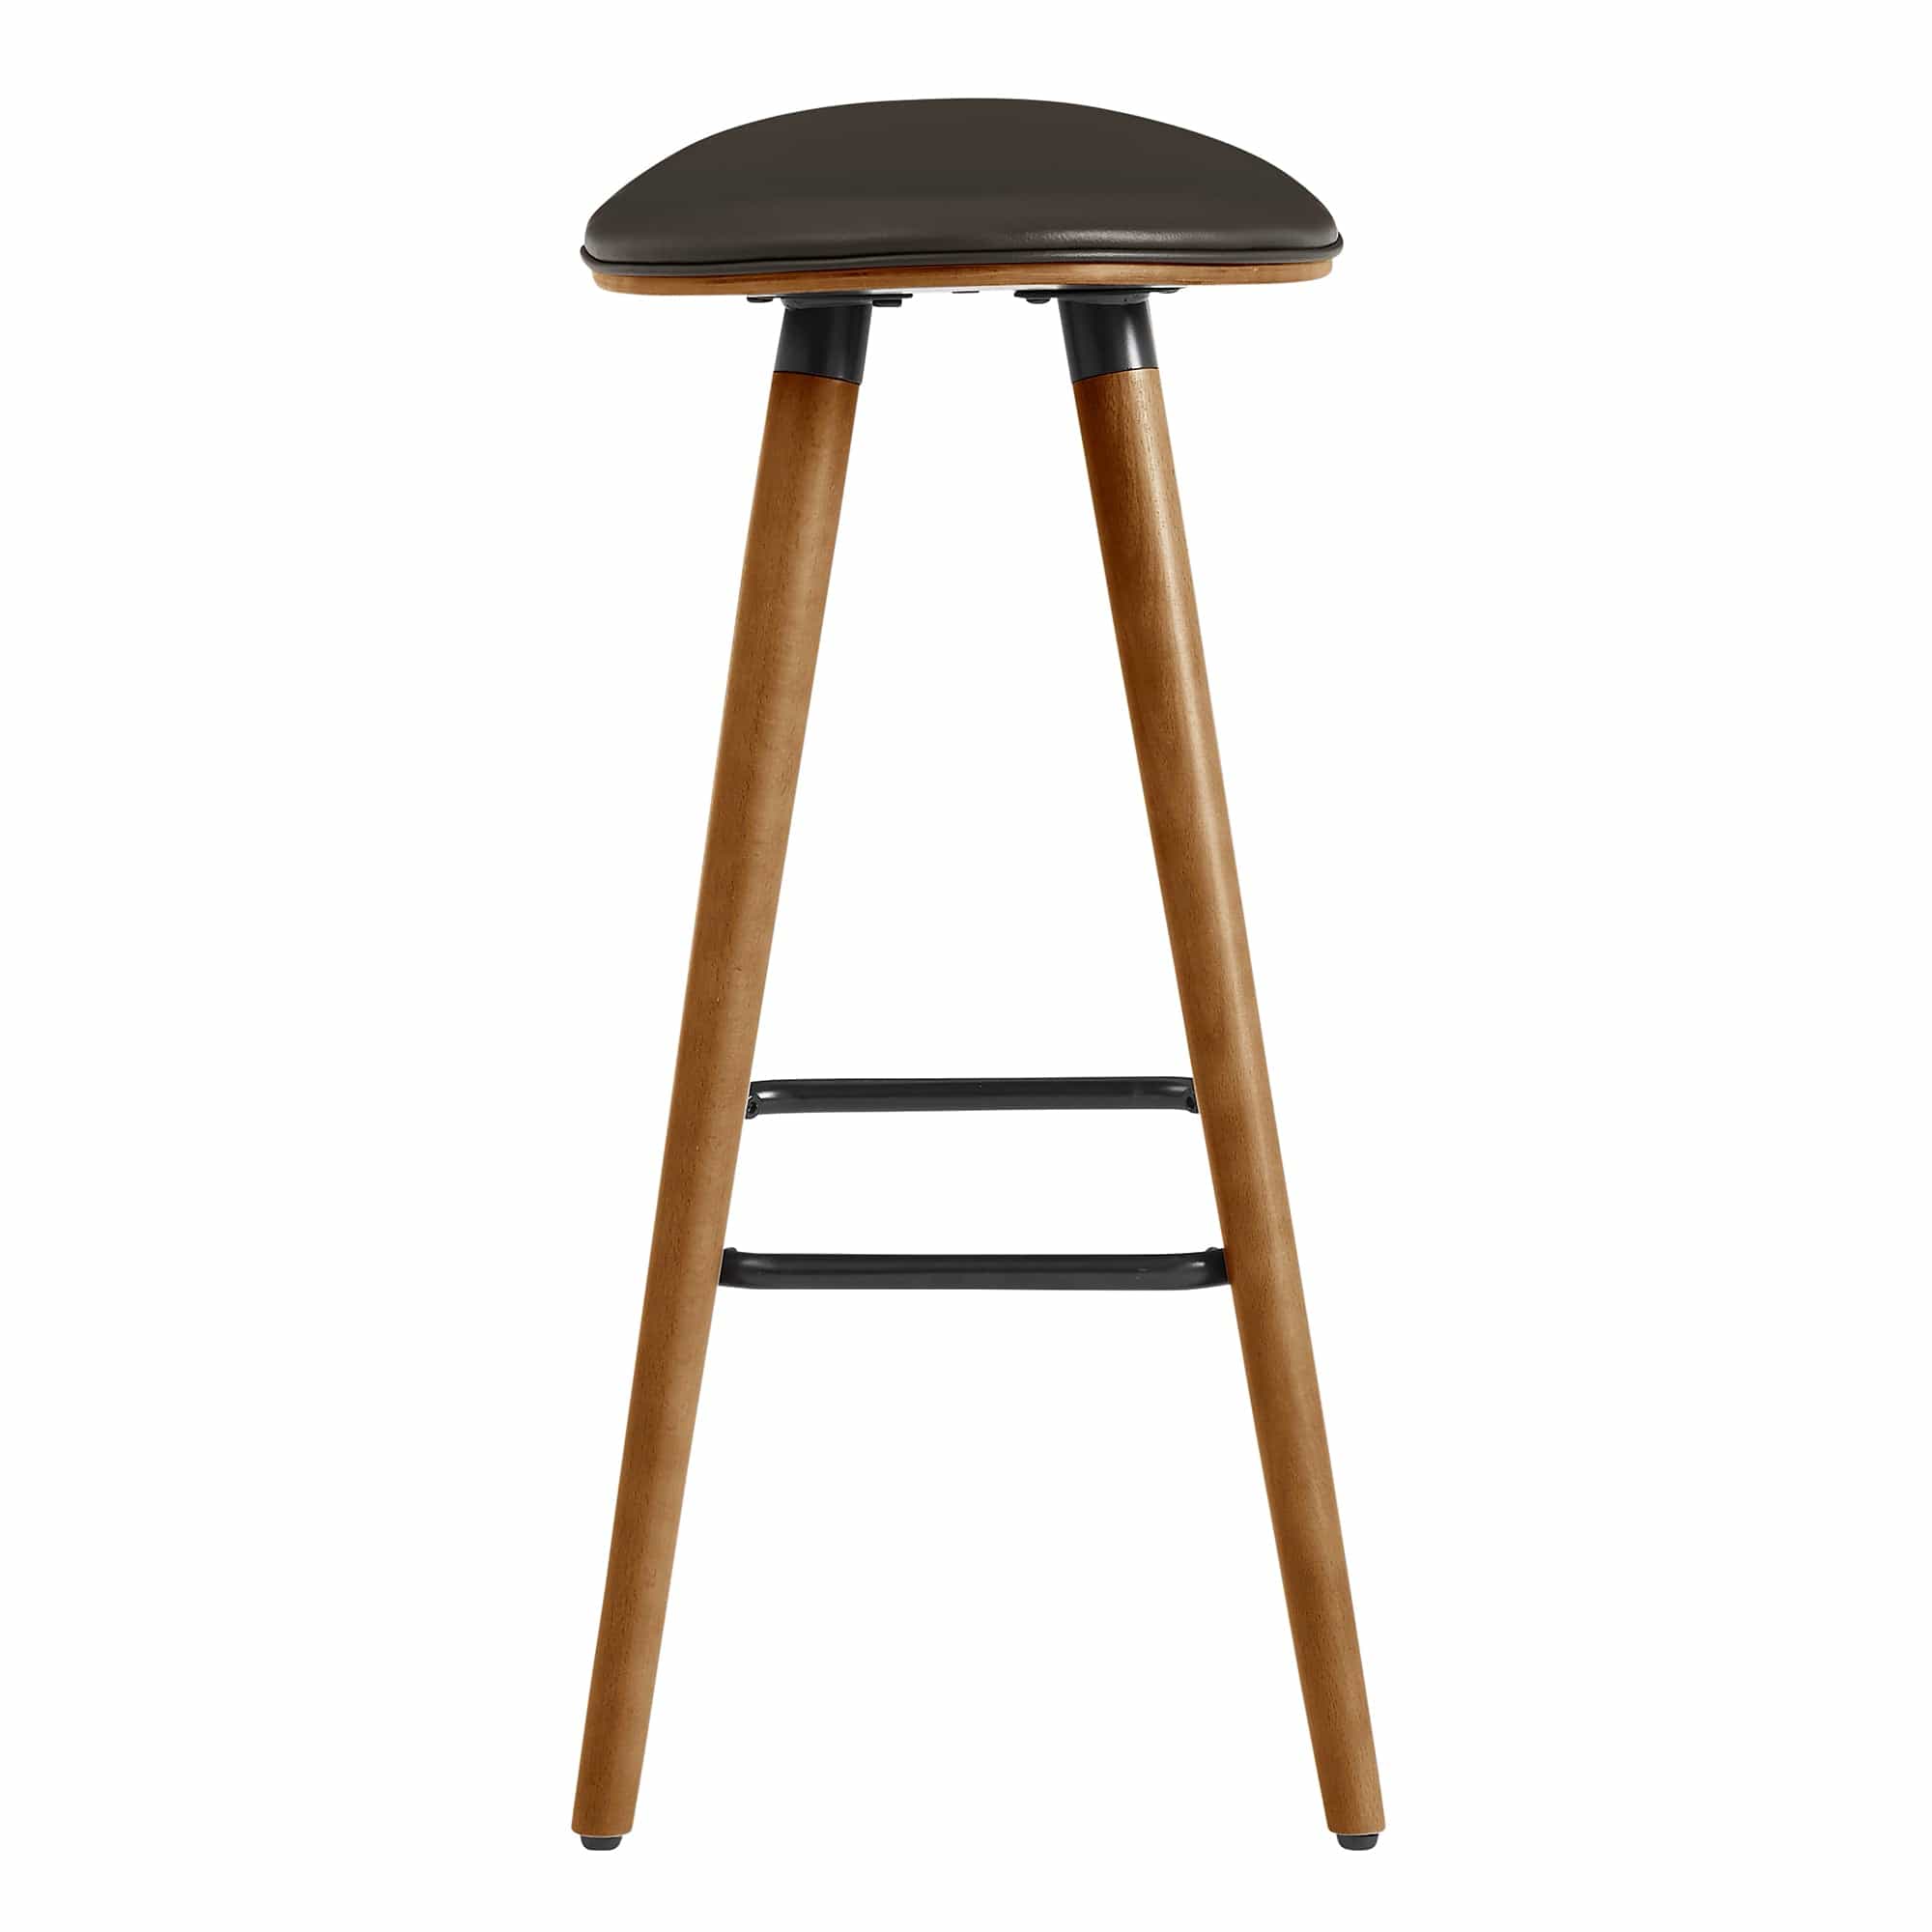 Armen Living Barstool Armen Living - Piper 26" Counter Height Backless Bar Stool in Gray Faux Leather and Walnut Wood | LCPPBAWAGR26